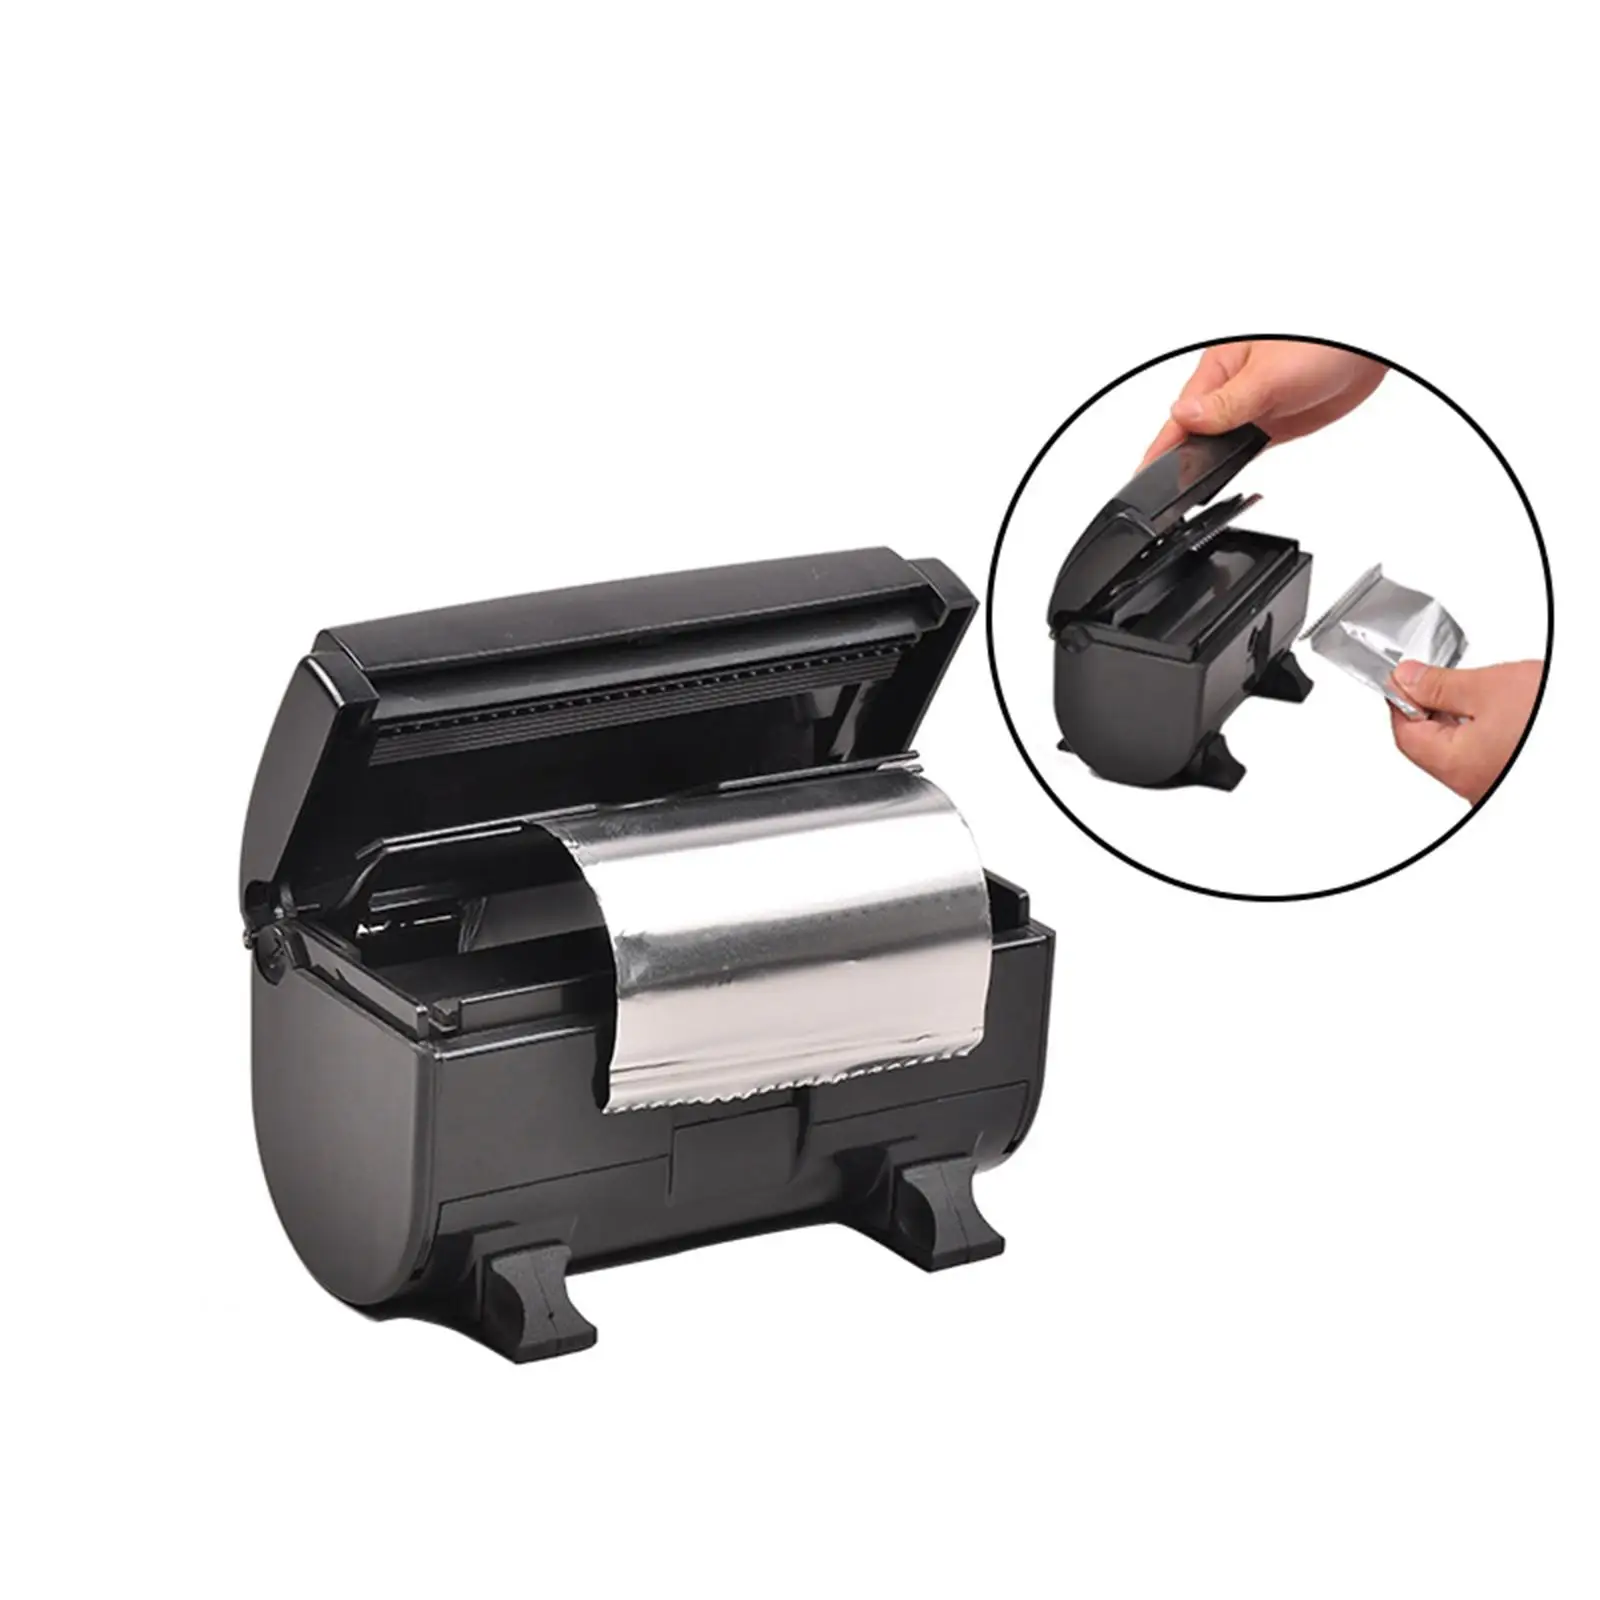 Tin Foil Cutter Automatic Cutting Portable Easy to Use Black Foil Paper Dispenser for Hairdressing Nail Art Tin Foil Hair Salon